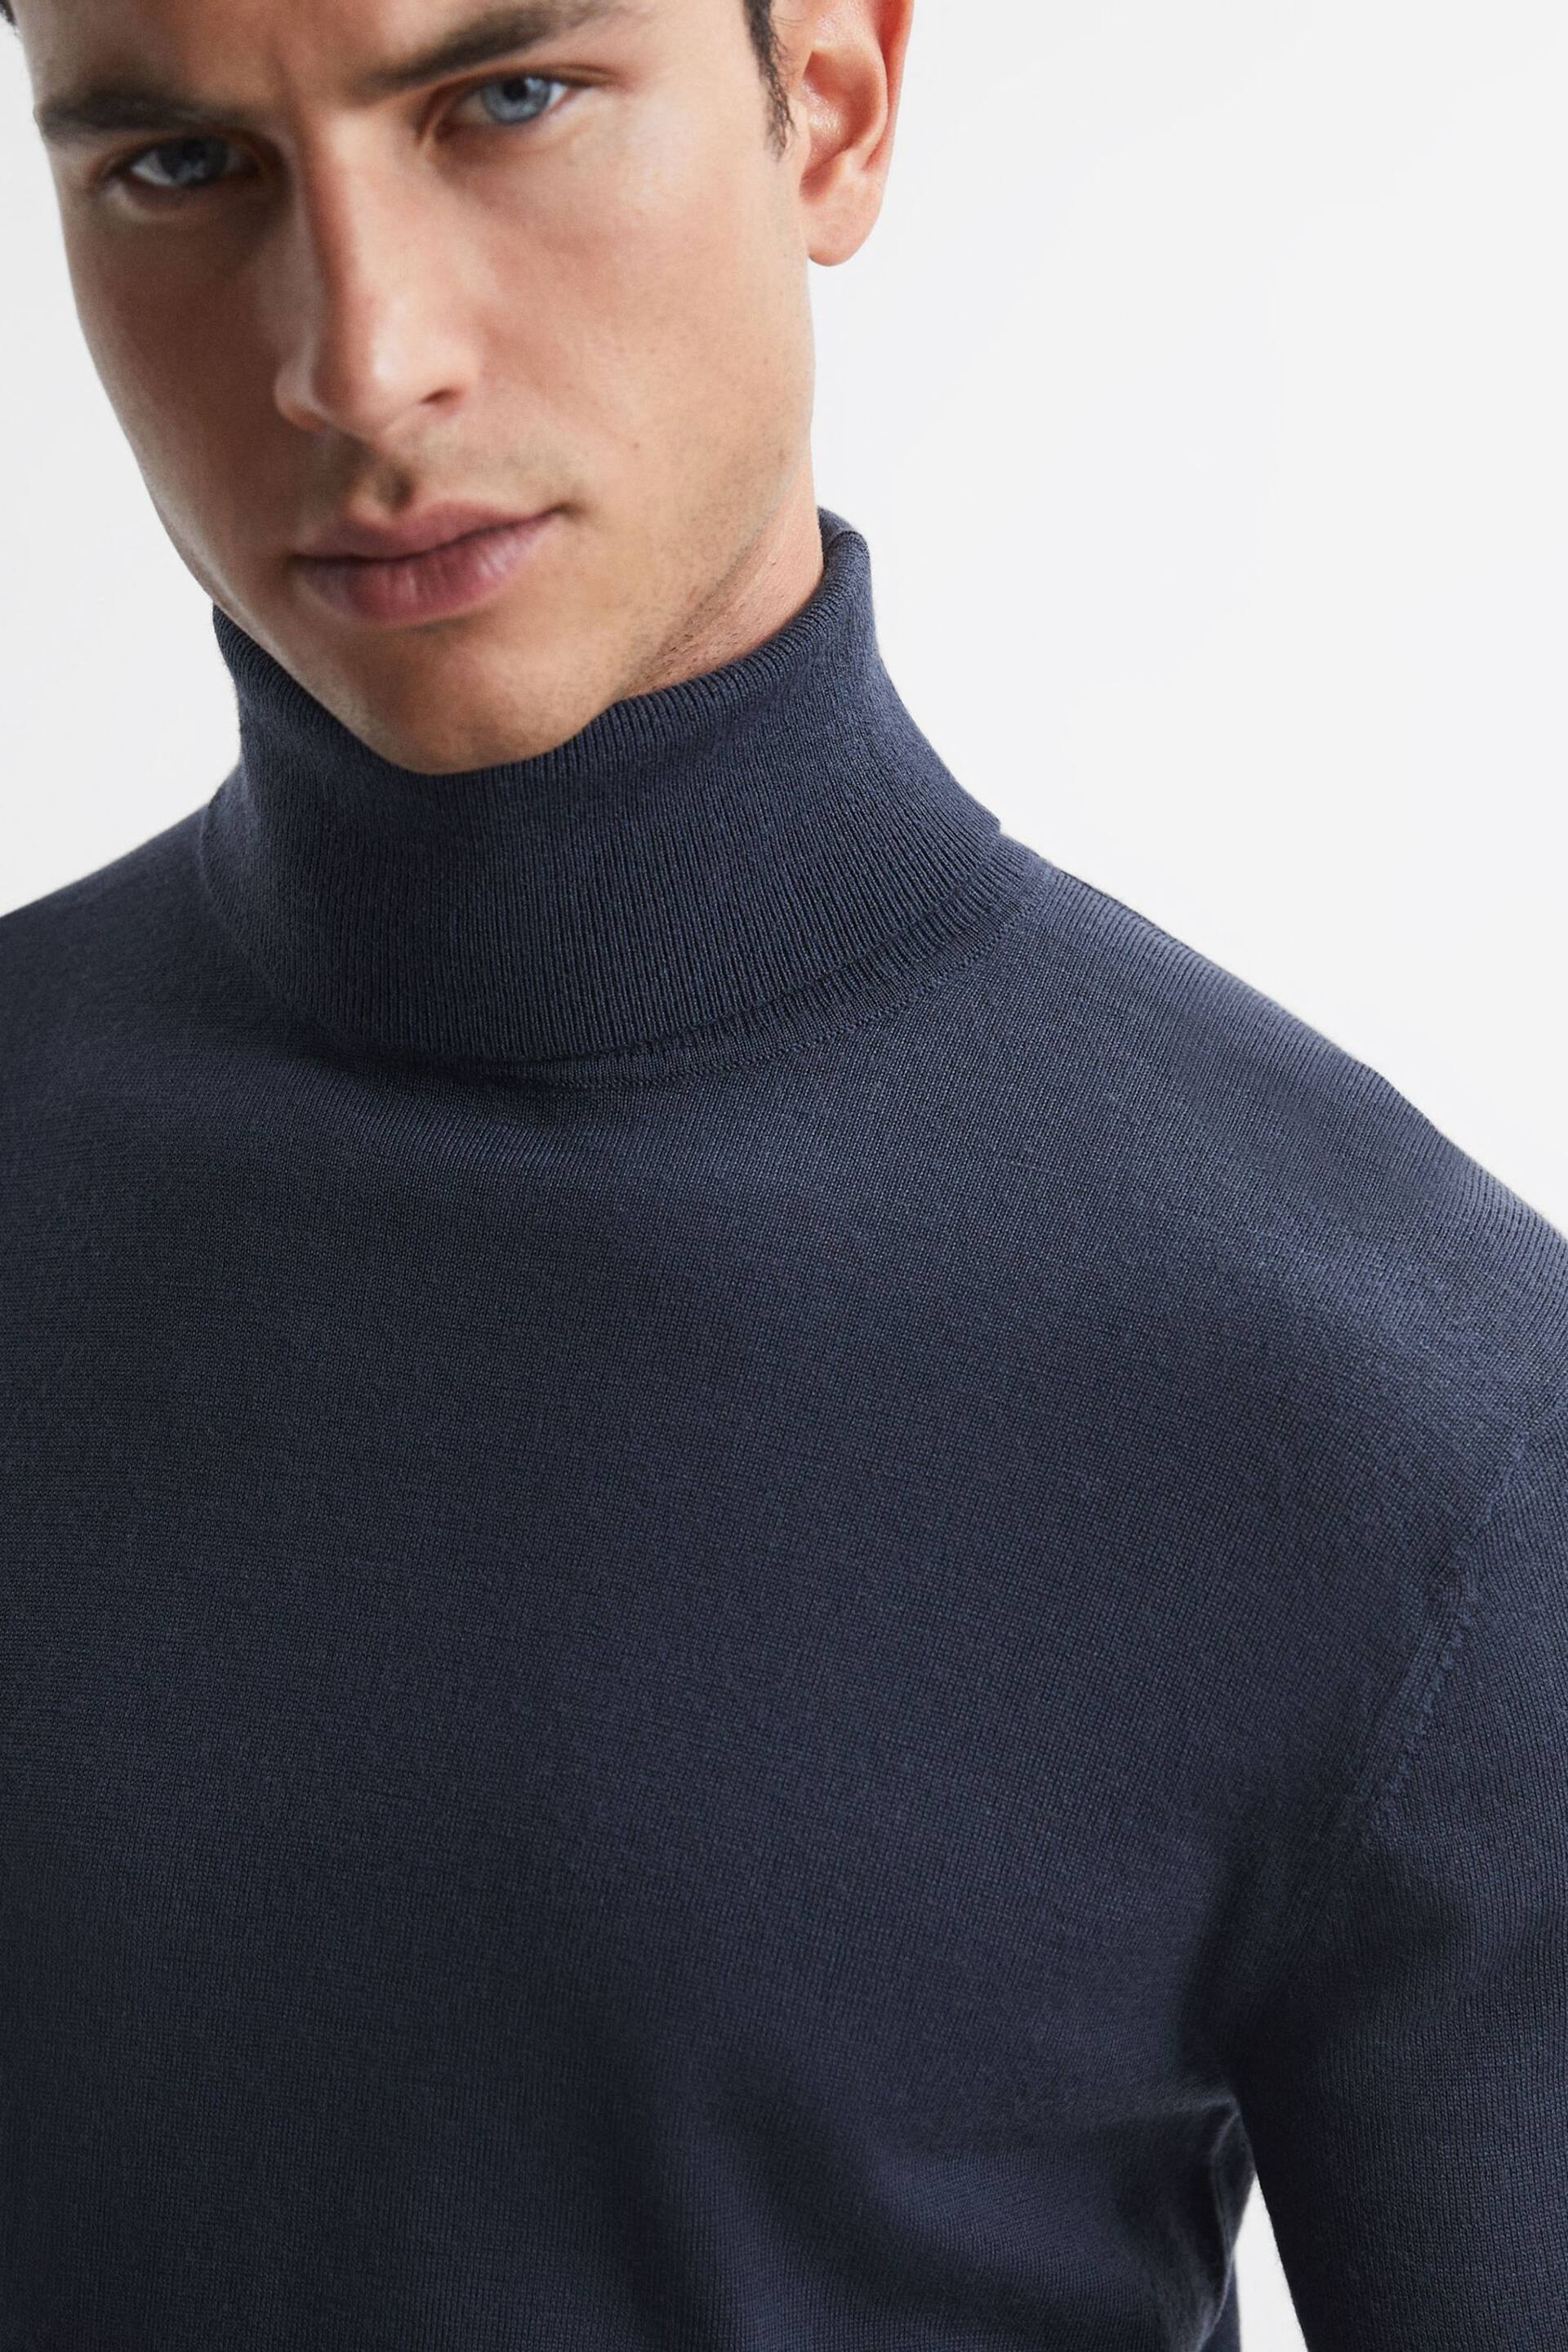 Reiss Eclipse Blue Caine Slim Fit Merino Wool Roll Neck Jumper - Image 4 of 5